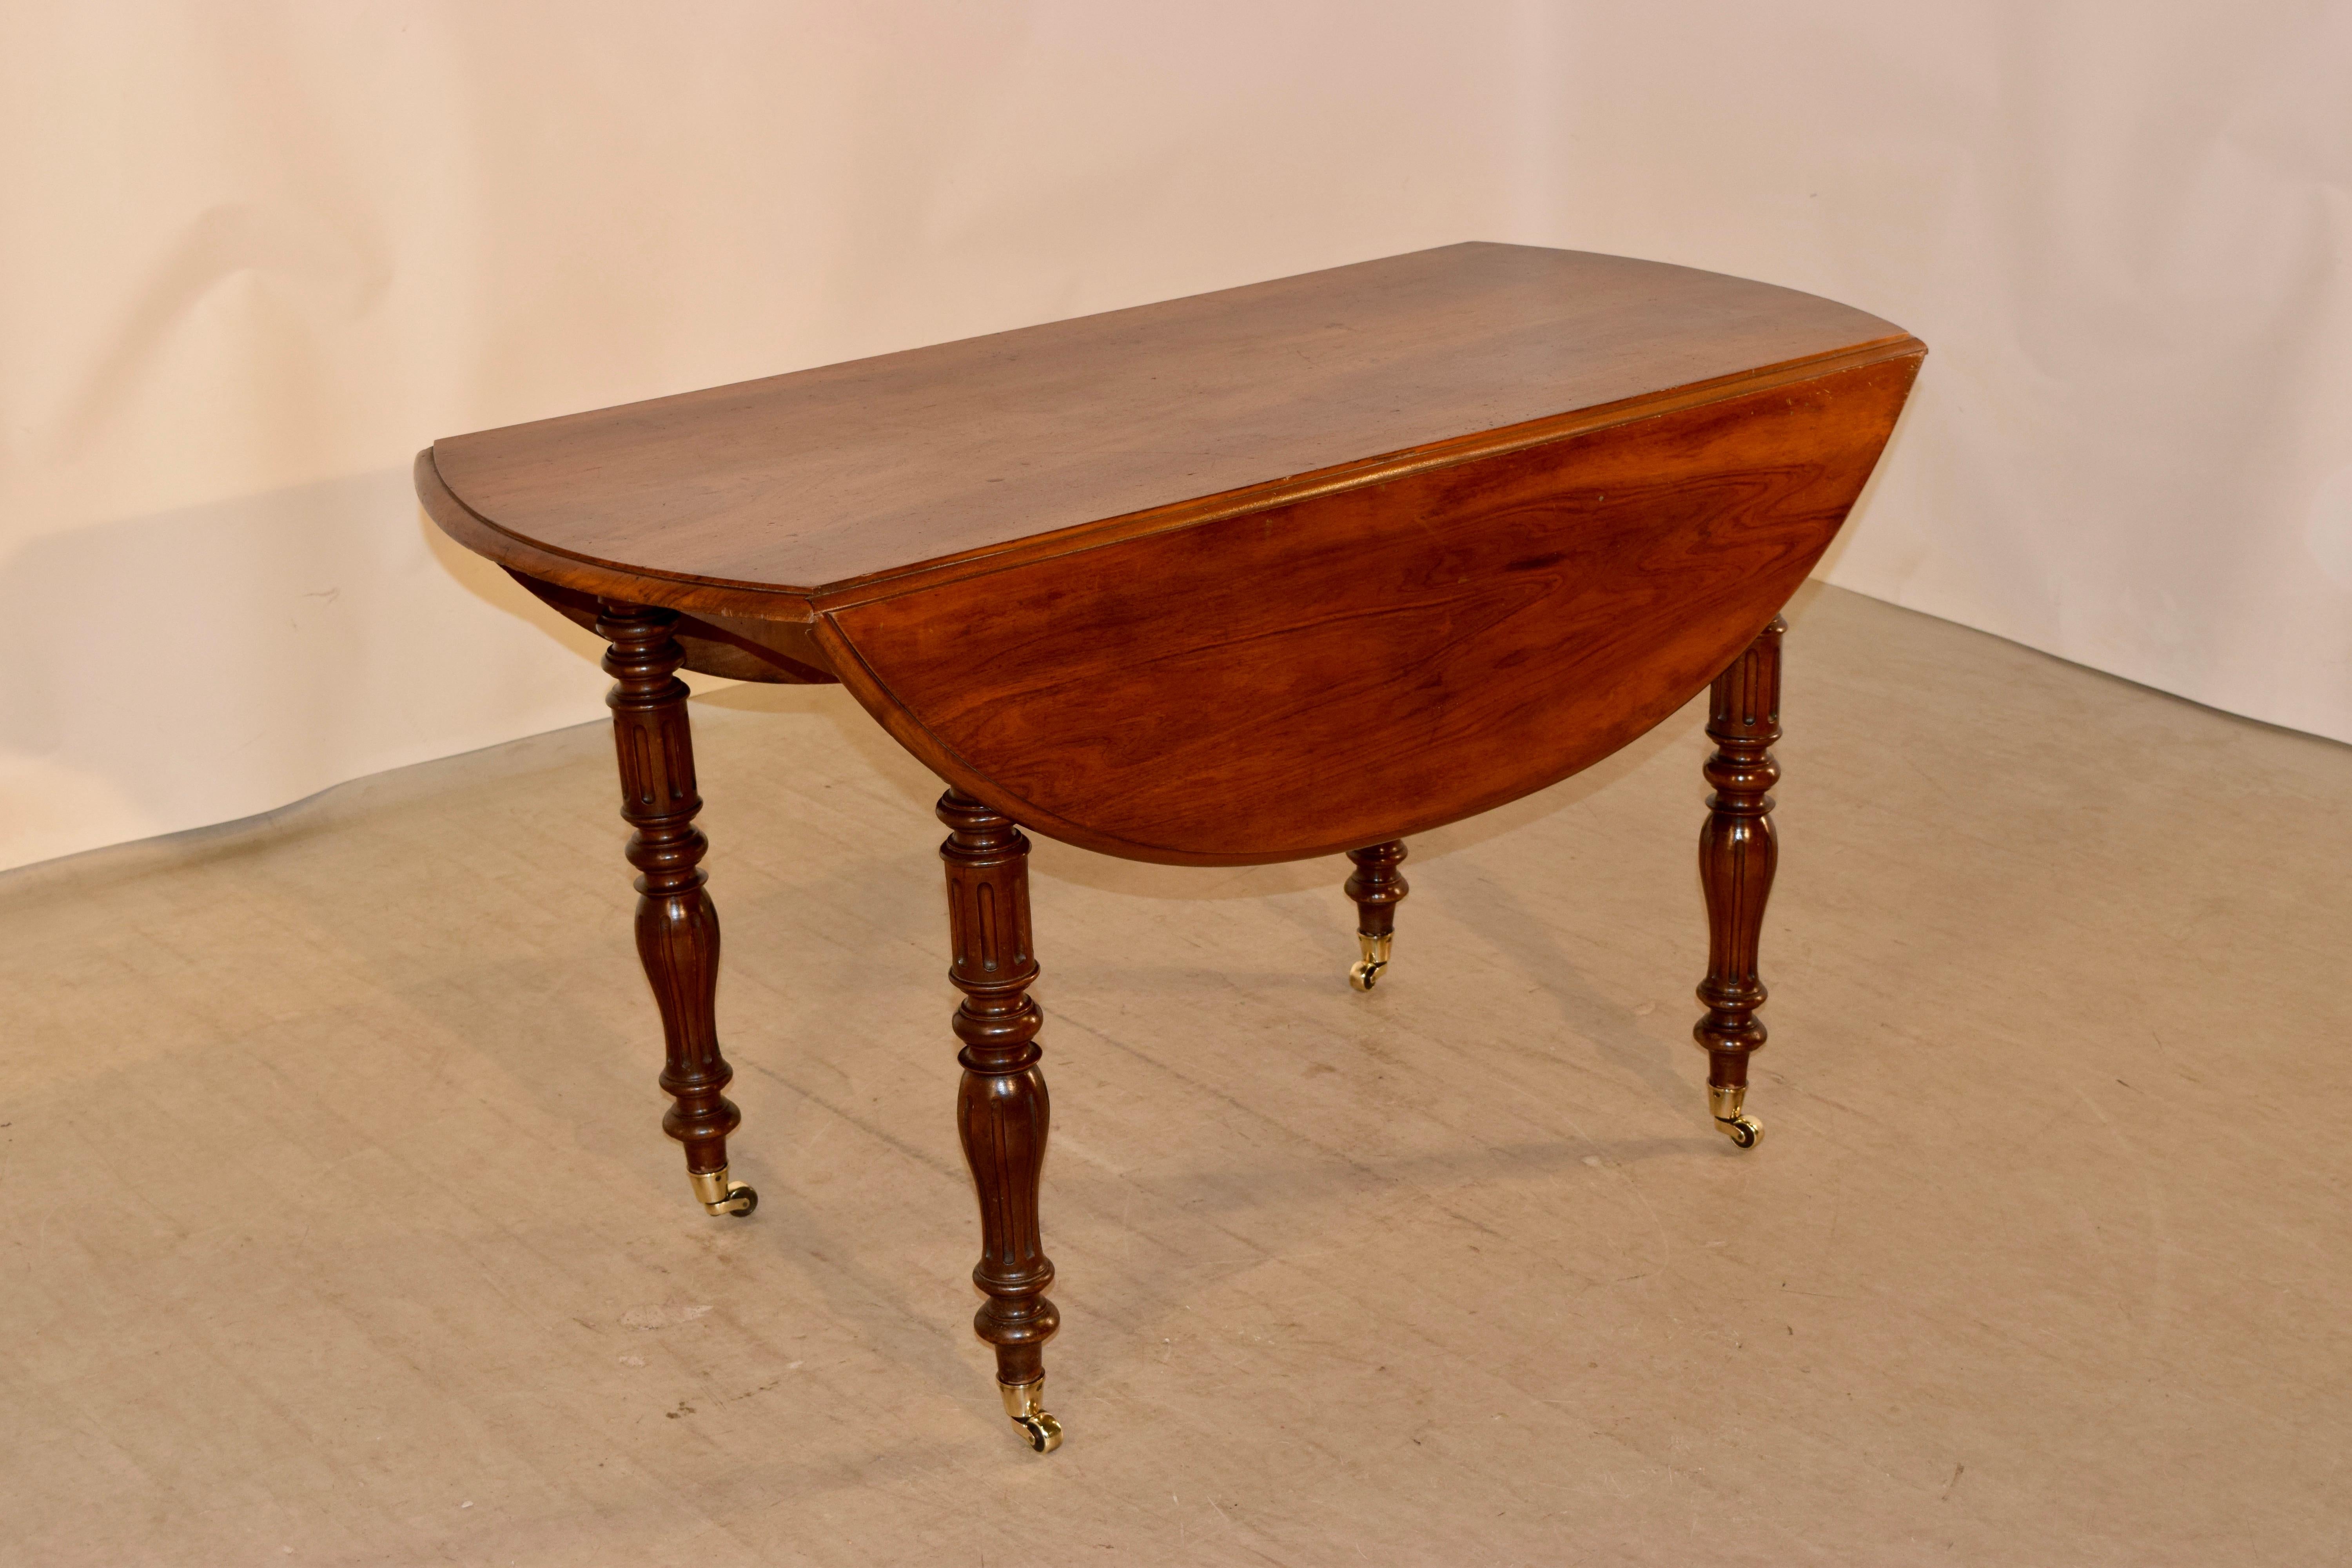 19th century Louis Philippe drop-leaf table in cherry, from France. The top has wonderful graining and beveled edges. The top opens to measure 49.88 x 44.The top is over a simple apron and raised on hand-turned and fluted legs on brass casters.